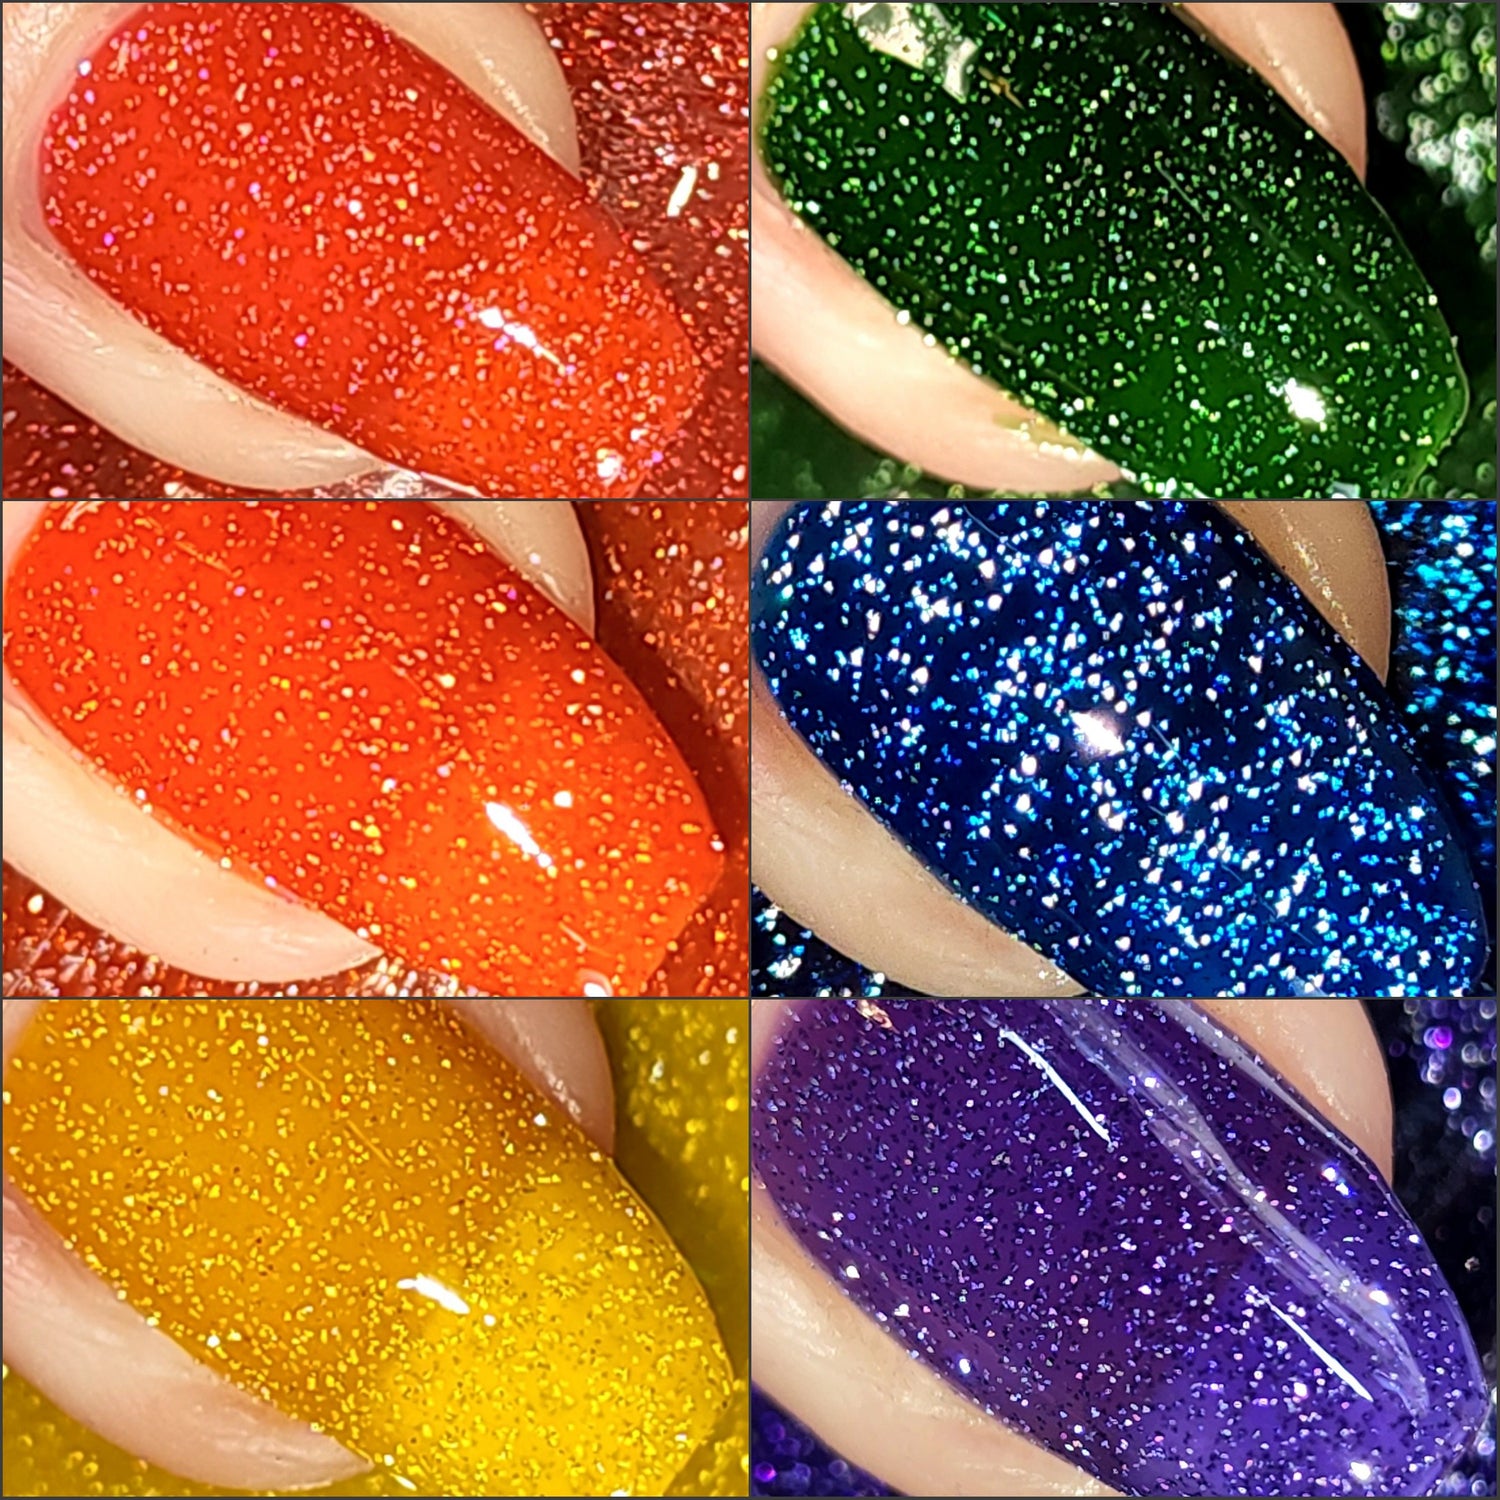 Reflective Loose Glitter #1 . Available on Website. One of my Favorit, Reflective Glitter Nails